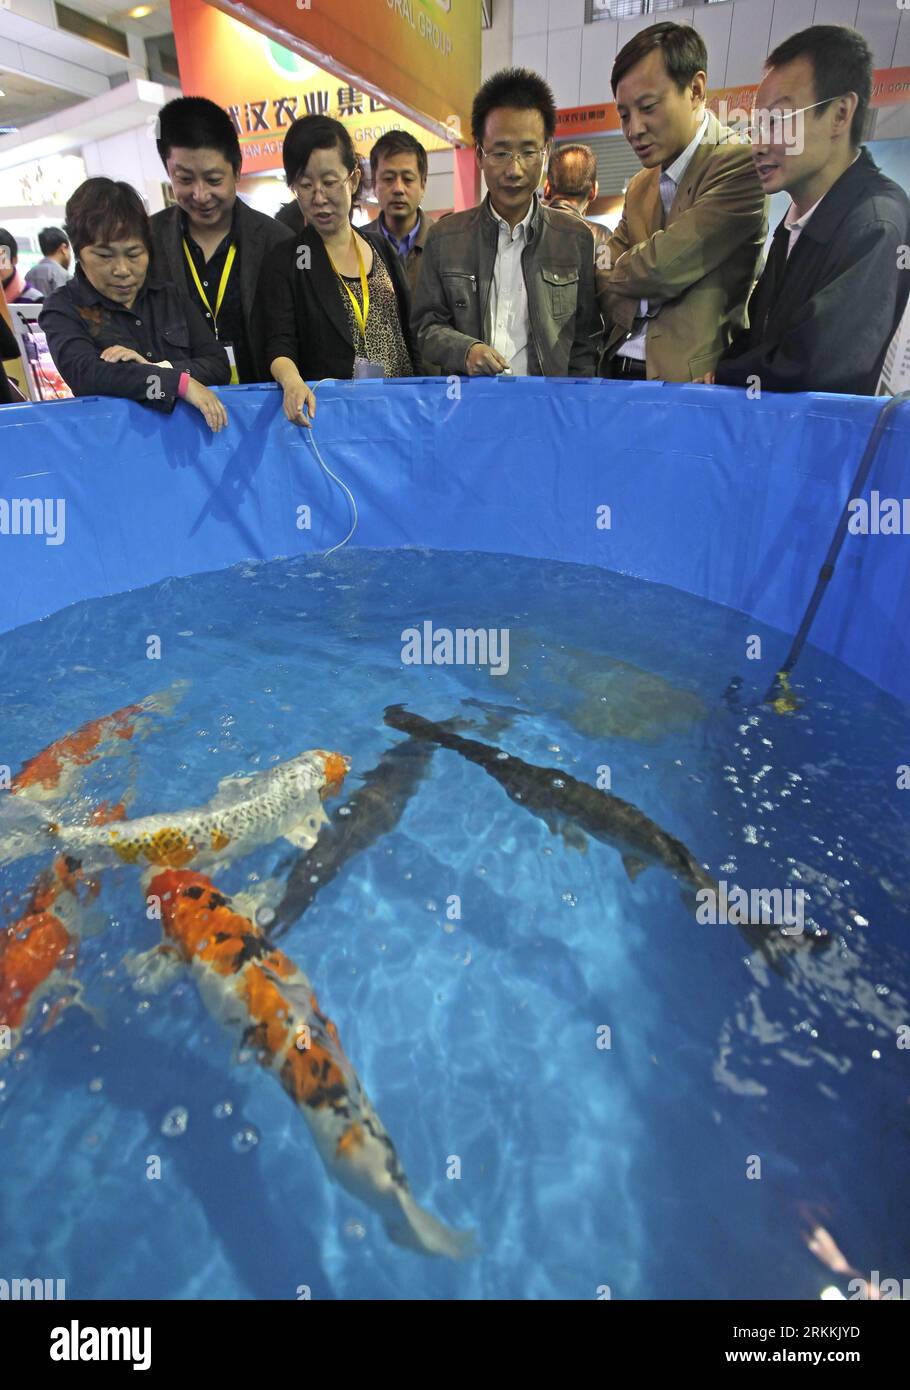 Bildnummer: 56250944  Datum: 05.11.2011  Copyright: imago/Xinhua (111105) -- WUHAN, Nov. 5, 2011 (Xinhua) -- Visitors look at freshwater fish during an agricultural fair in Wuhan, capital of central China s Hubei Province, Nov. 5, 2011. More than 17,000 agricultural produces from 2,300 exhibitors around the world took part in the fair starting on Saturday. (Xinhua) (ry) CHINA-WUHAN-AGRICULTURE-FAIR (CN) PUBLICATIONxNOTxINxCHN Wirtschaft Messe Landwirtschaft Landwirtschaftsmesse xbs x0x 2011 hoch      56250944 Date 05 11 2011 Copyright Imago XINHUA  Wuhan Nov 5 2011 XINHUA Visitors Look AT fres Stock Photo